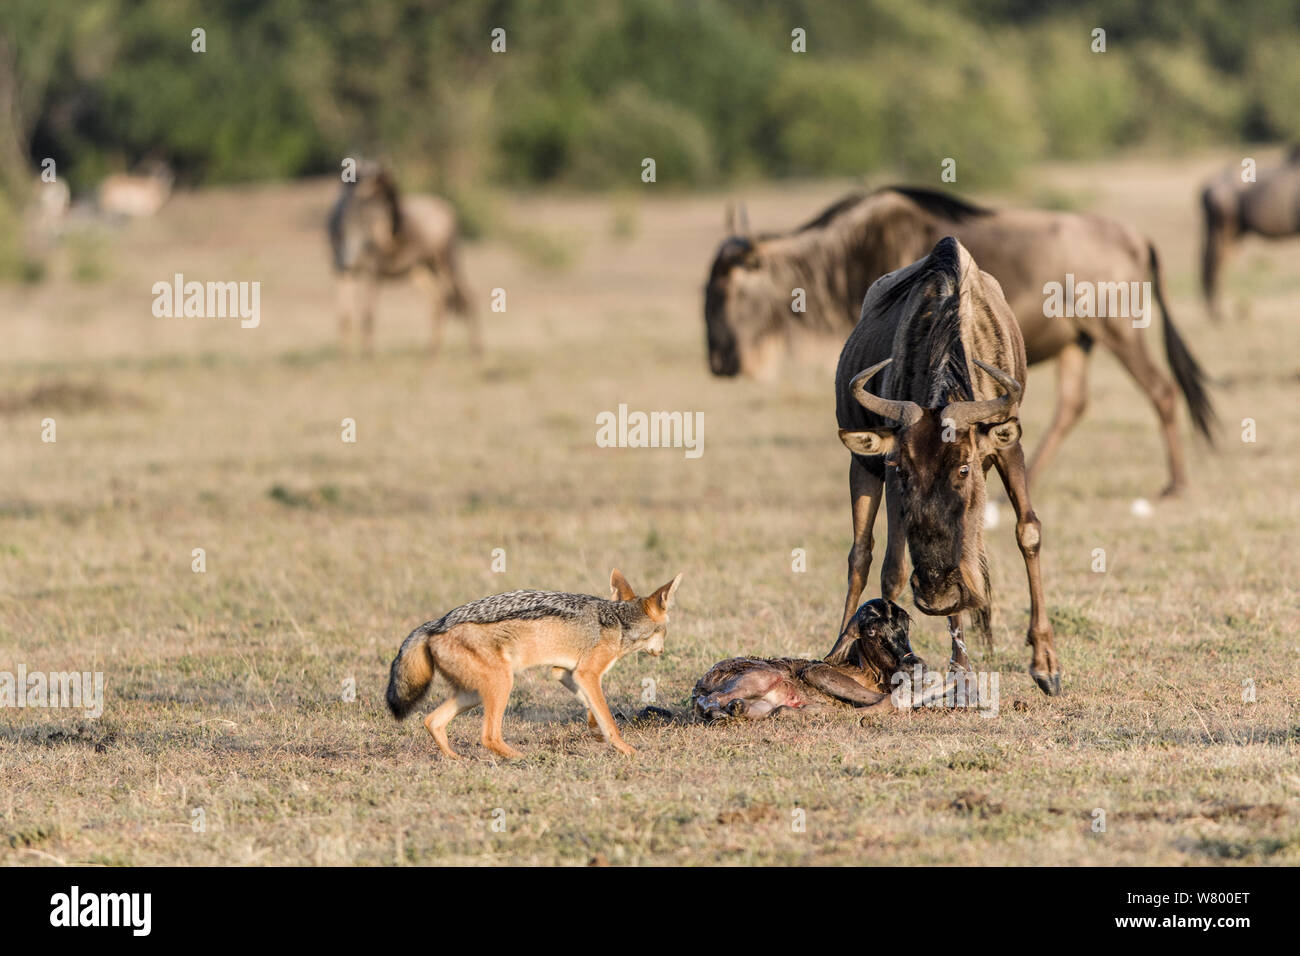 Wildebeest (Connochaetes taurinus) just after giving birth with Black-backed jackal (Canis mesomelas) watching, Masai-Mara Game Reserve, Kenya Stock Photo